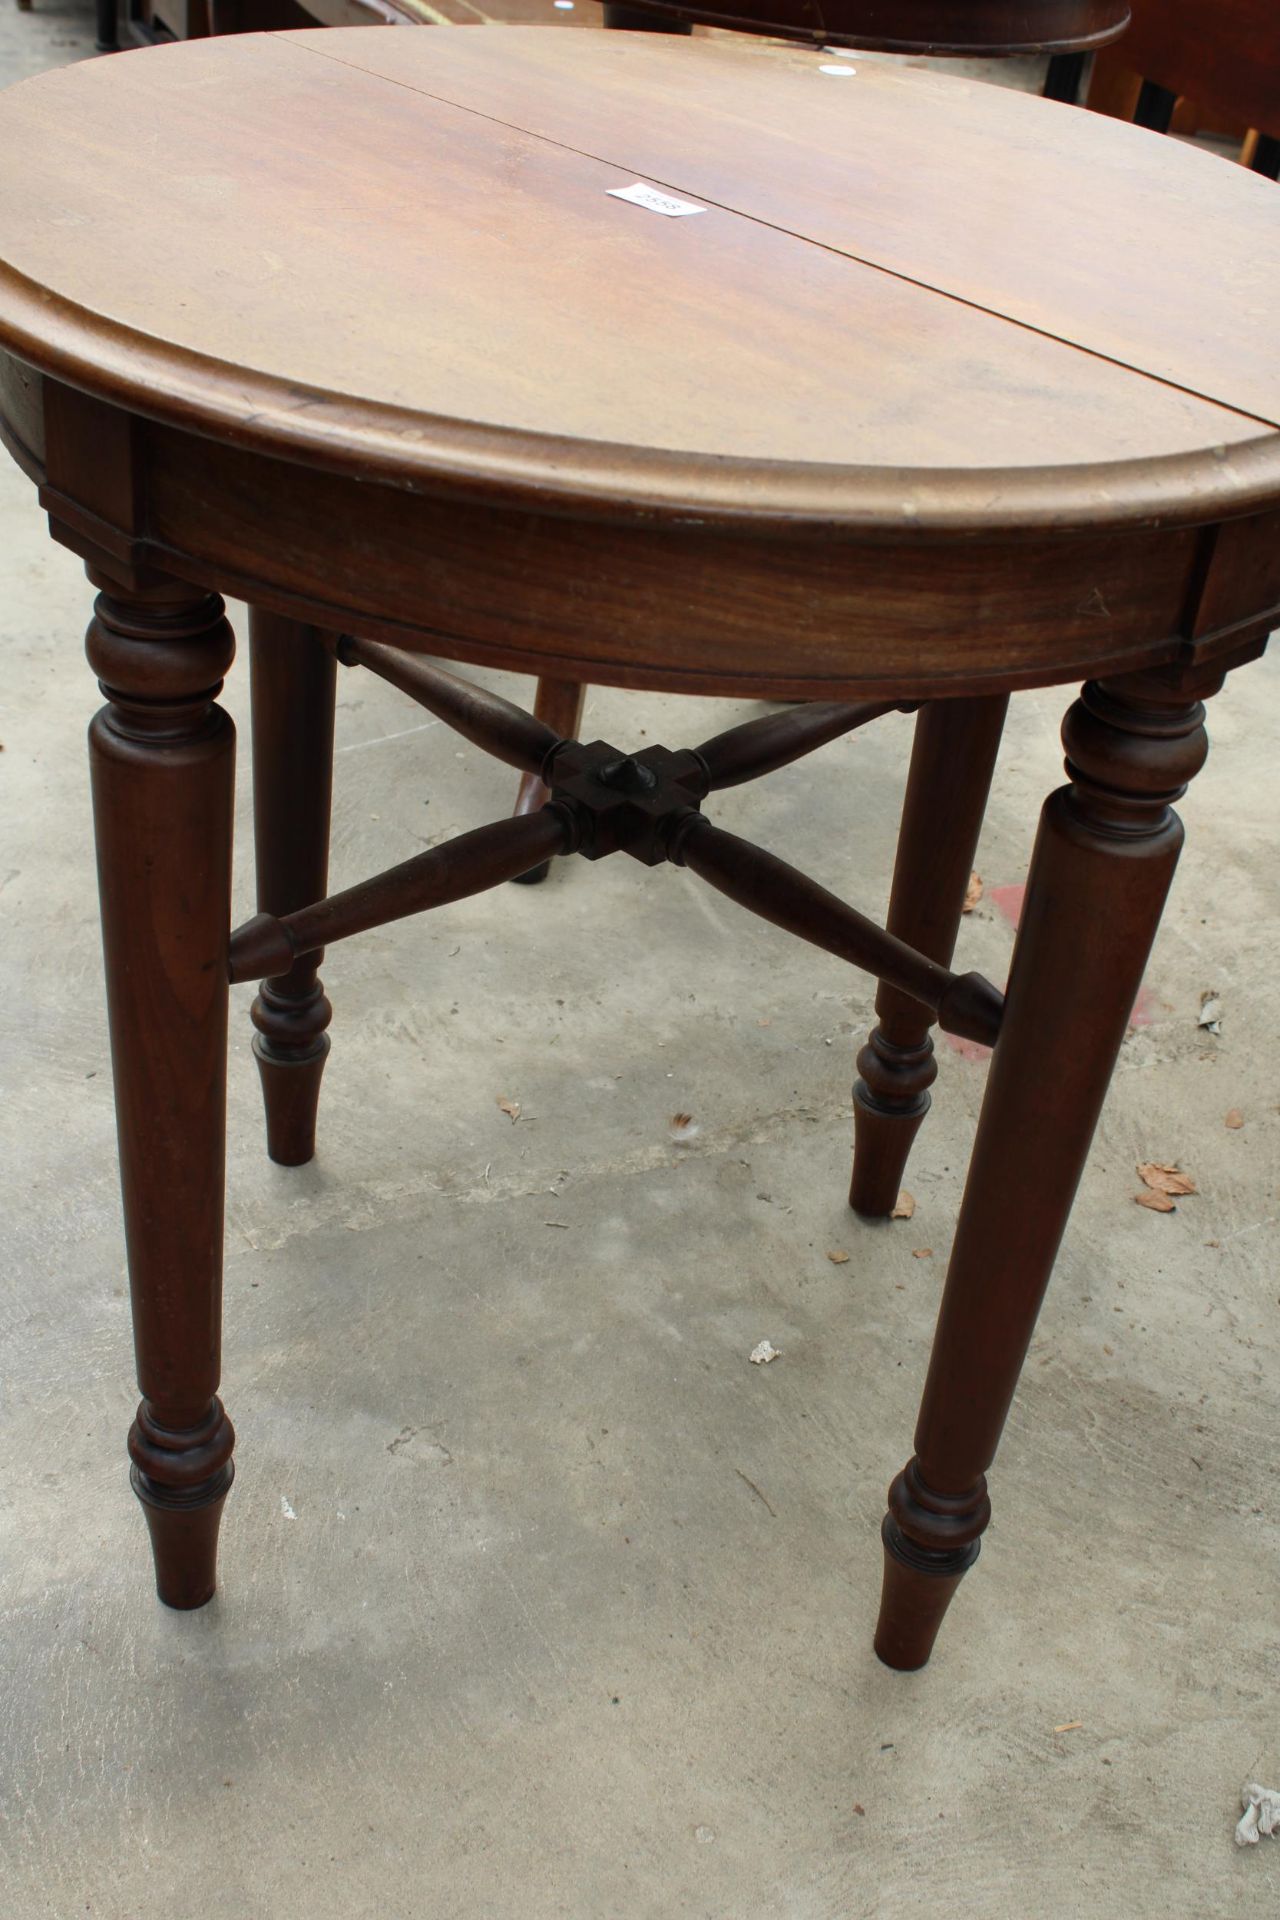 A VICTORIAN MAHOGANY 25" DIAMETER CENTRE TABLE ON TURNED LEGS AND STRETCHERS - Image 2 of 2